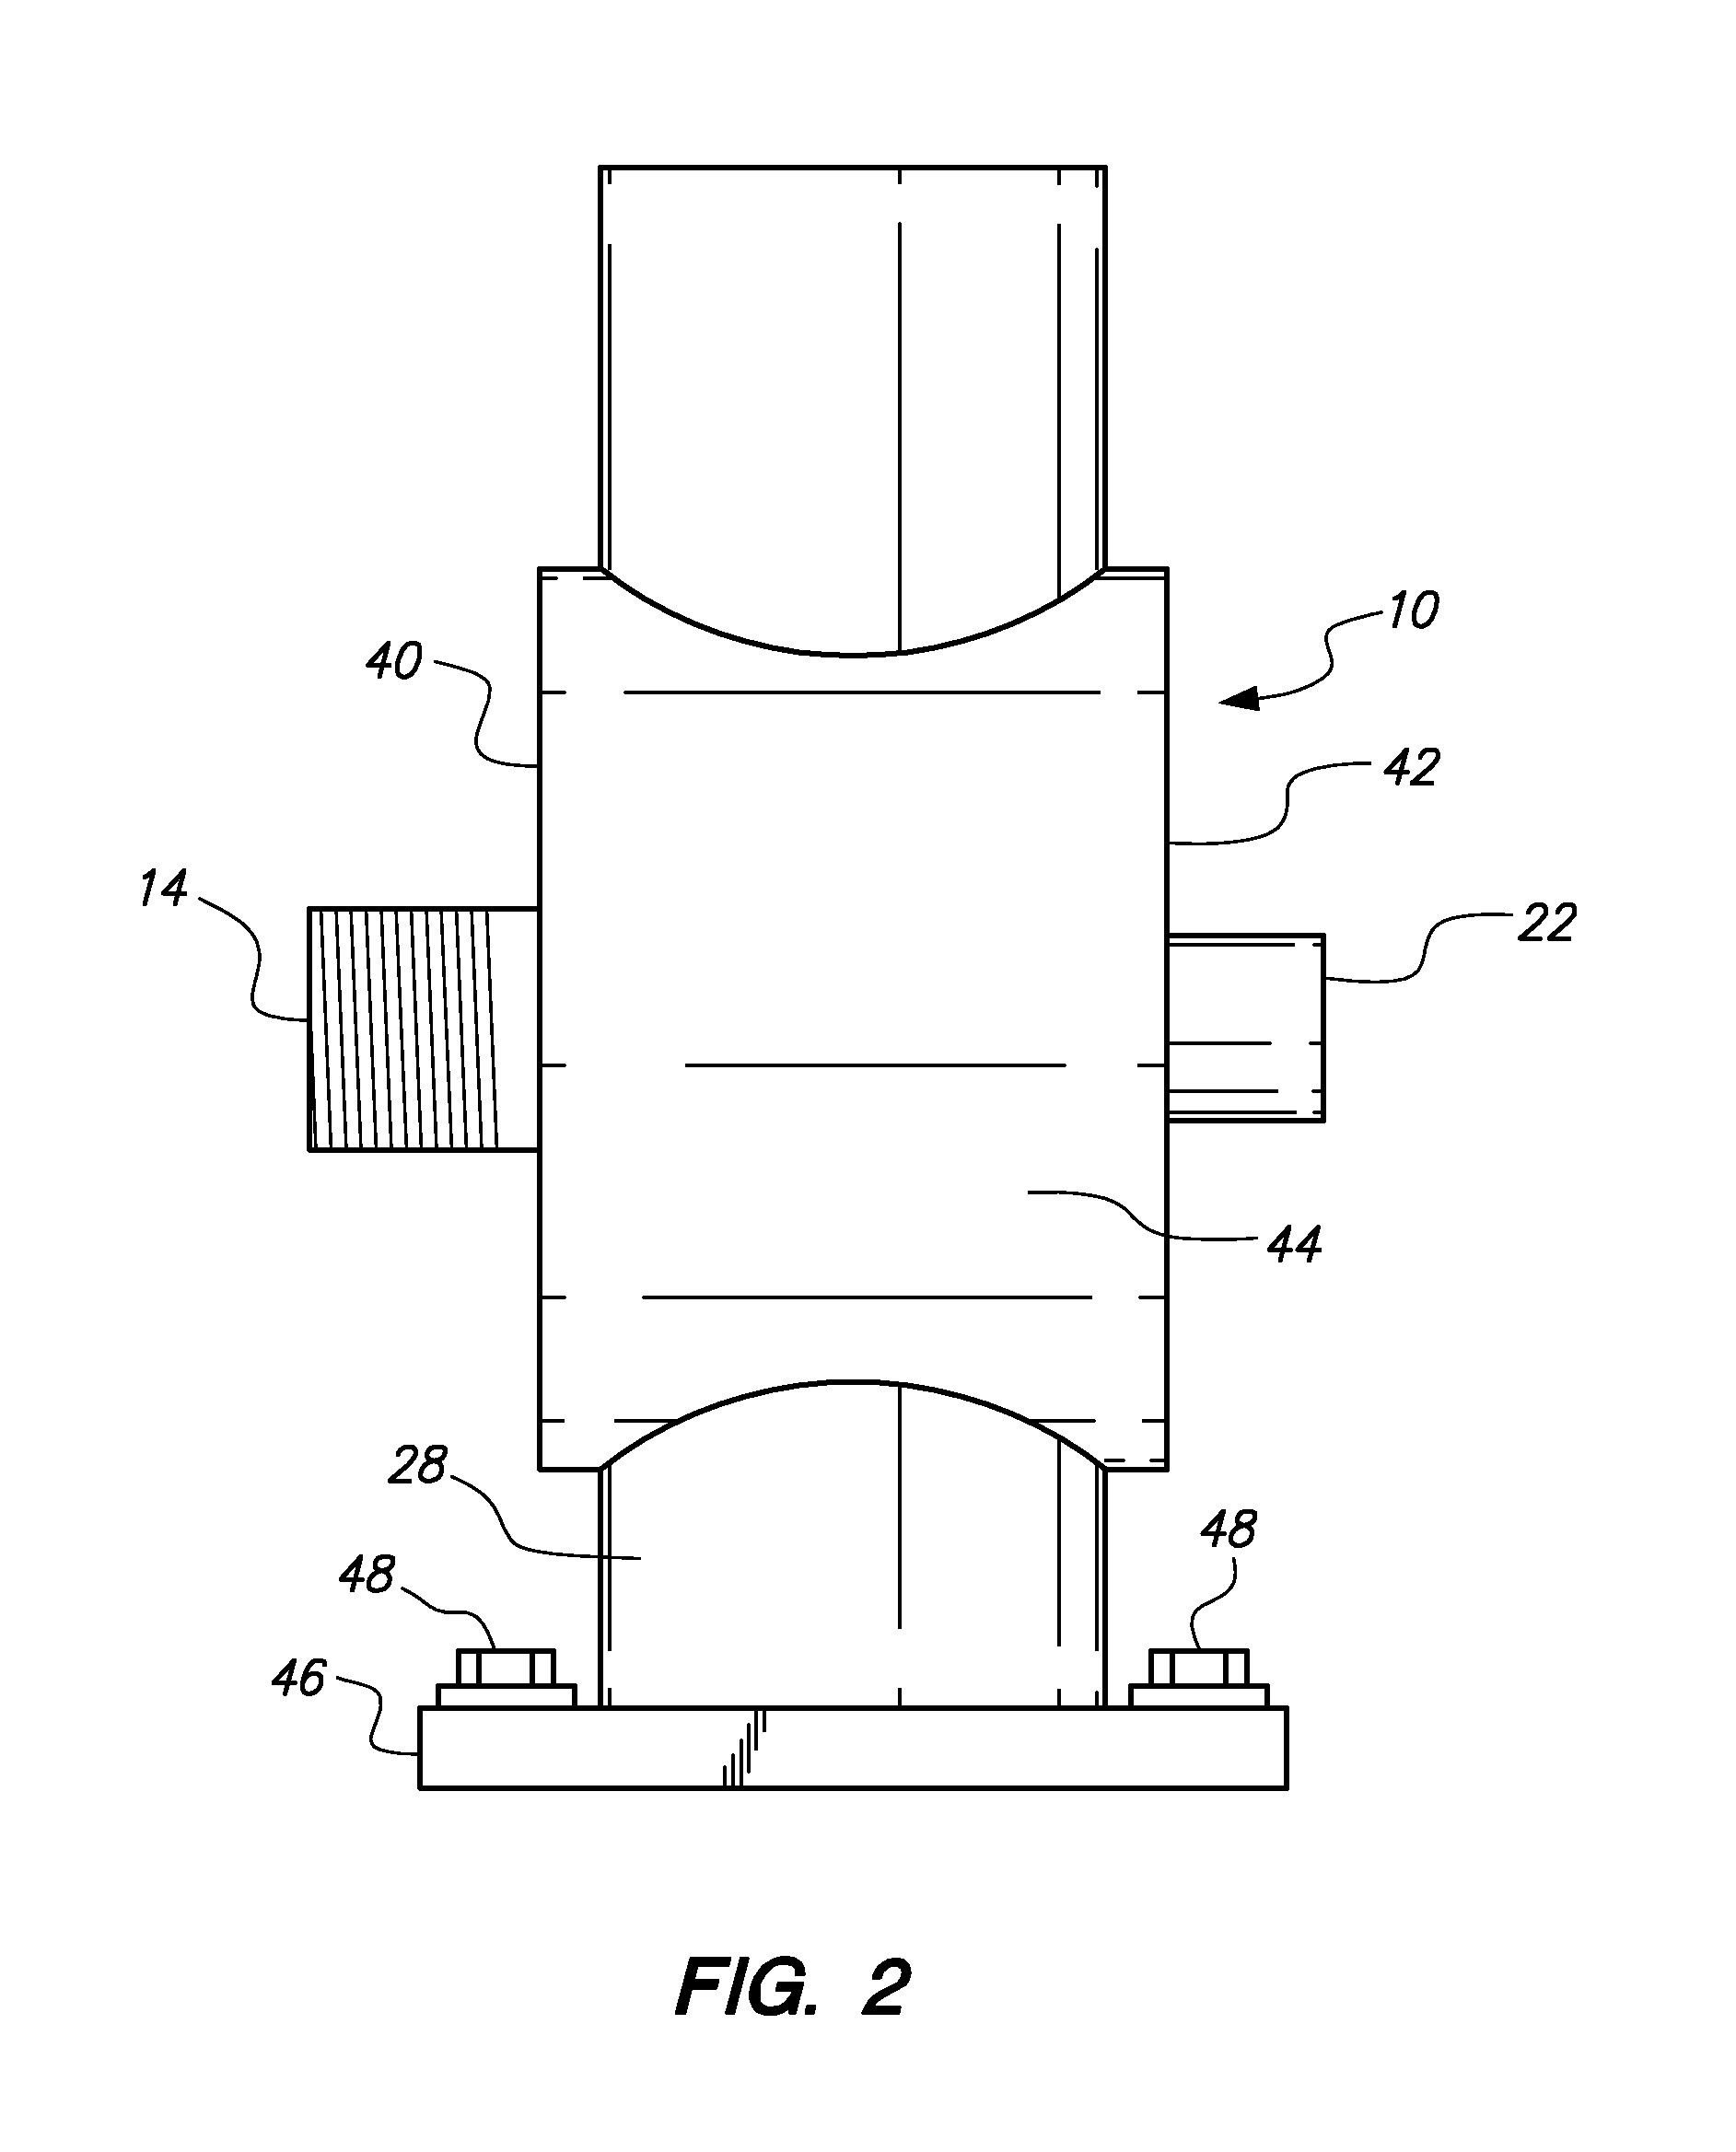 Foam generating apparatus and method for compressed air foam systems